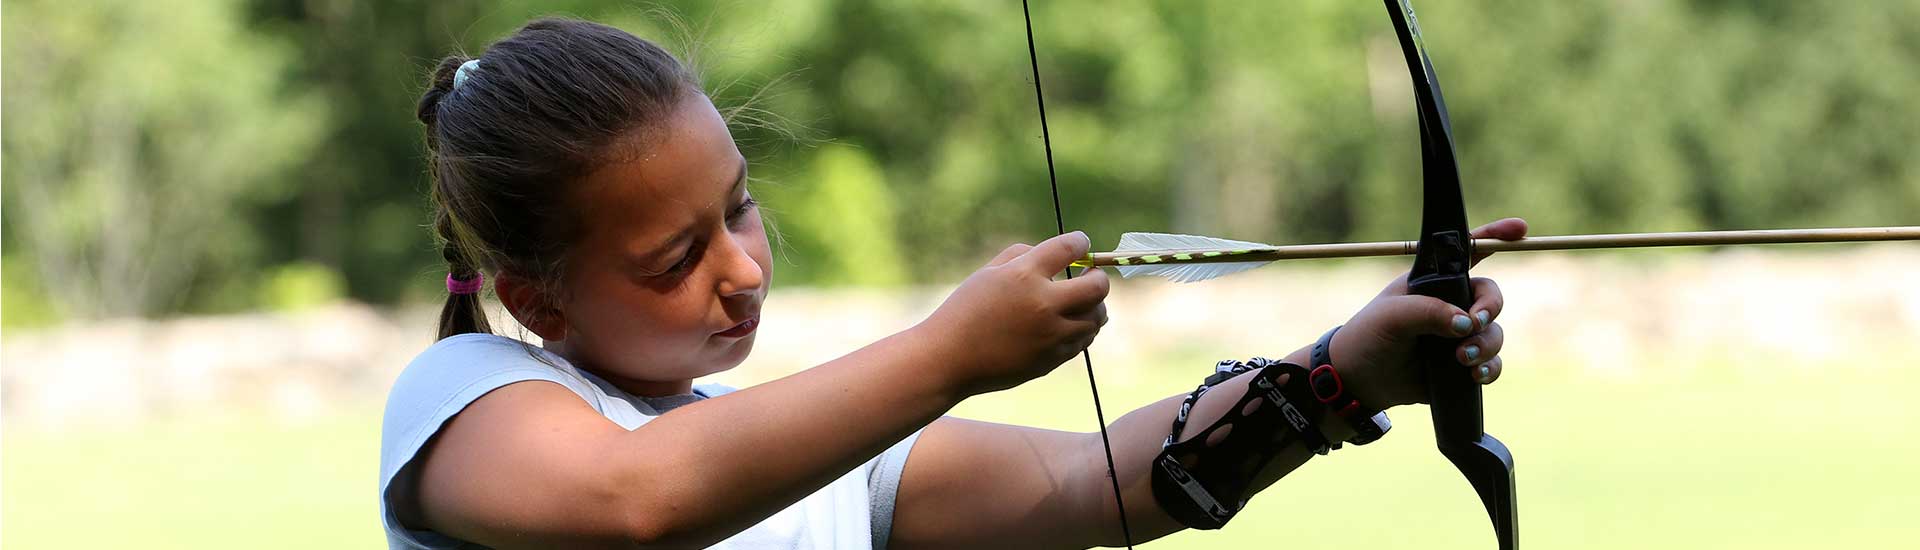 A camper takes aim on the archery pit